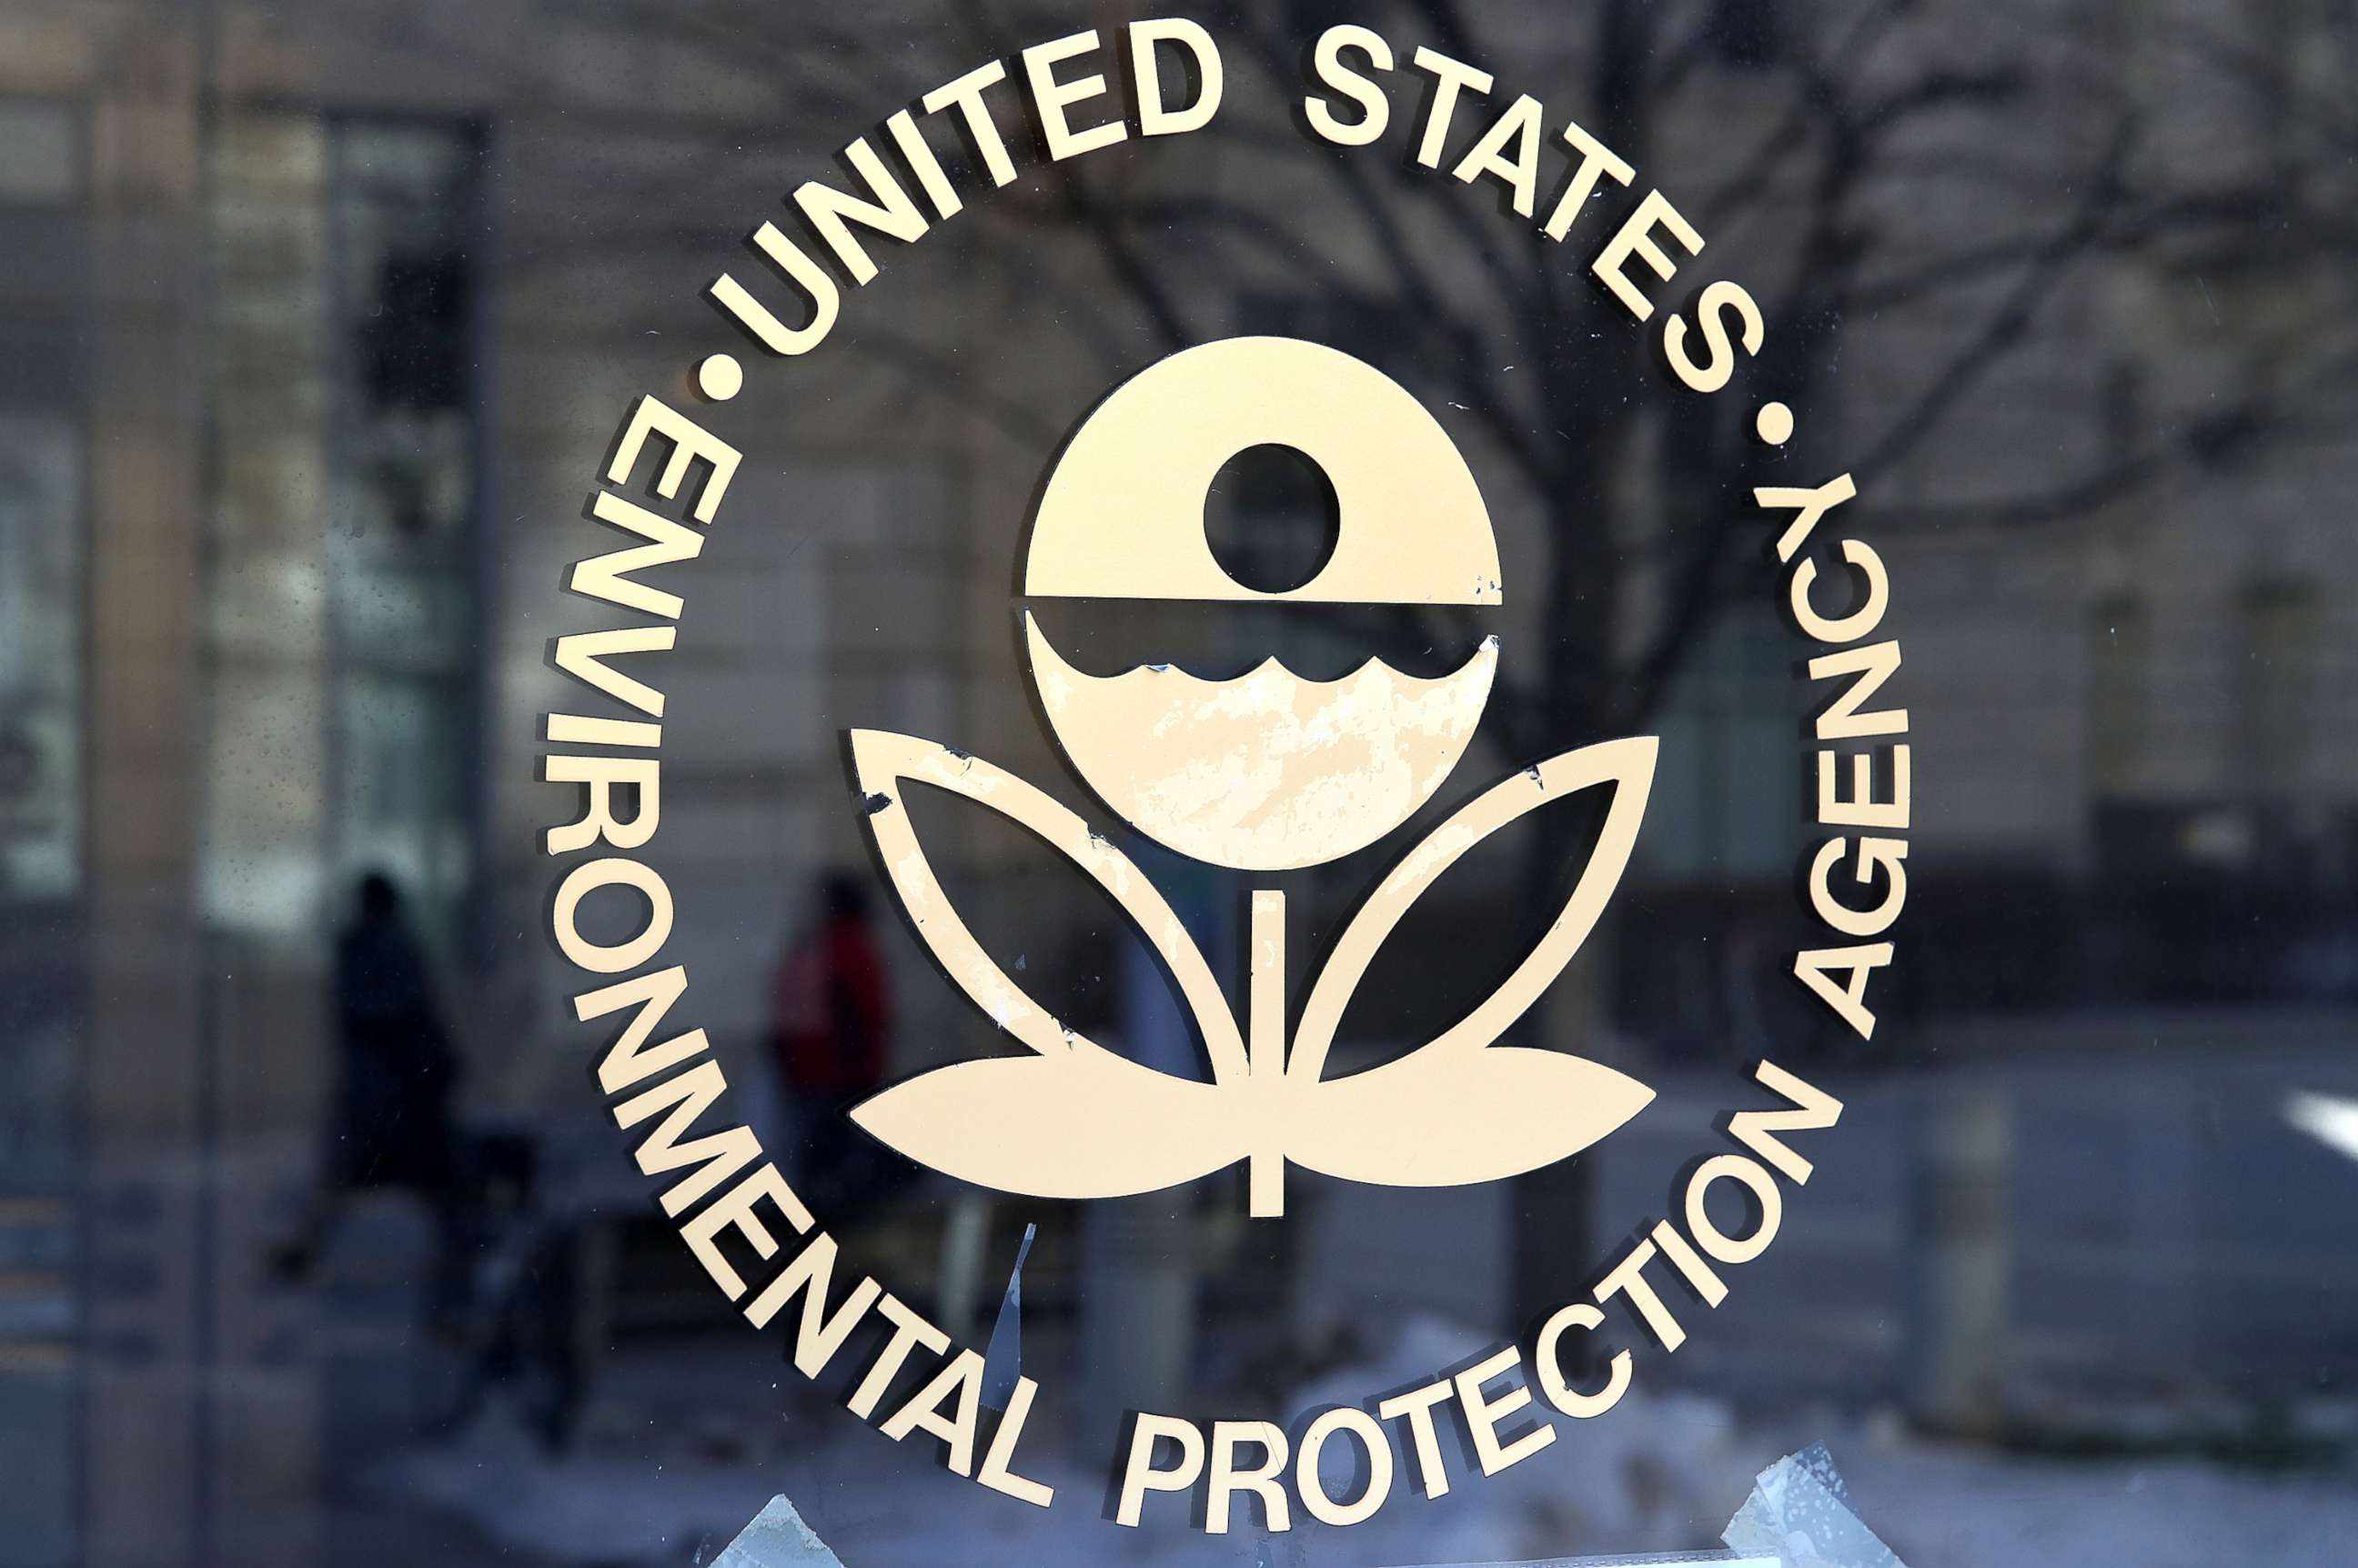 PHOTO: The U.S. Environmental Protection Agency's (EPA) logo is displayed on a door at its headquarters, March 16, 2017, in Washington, DC.